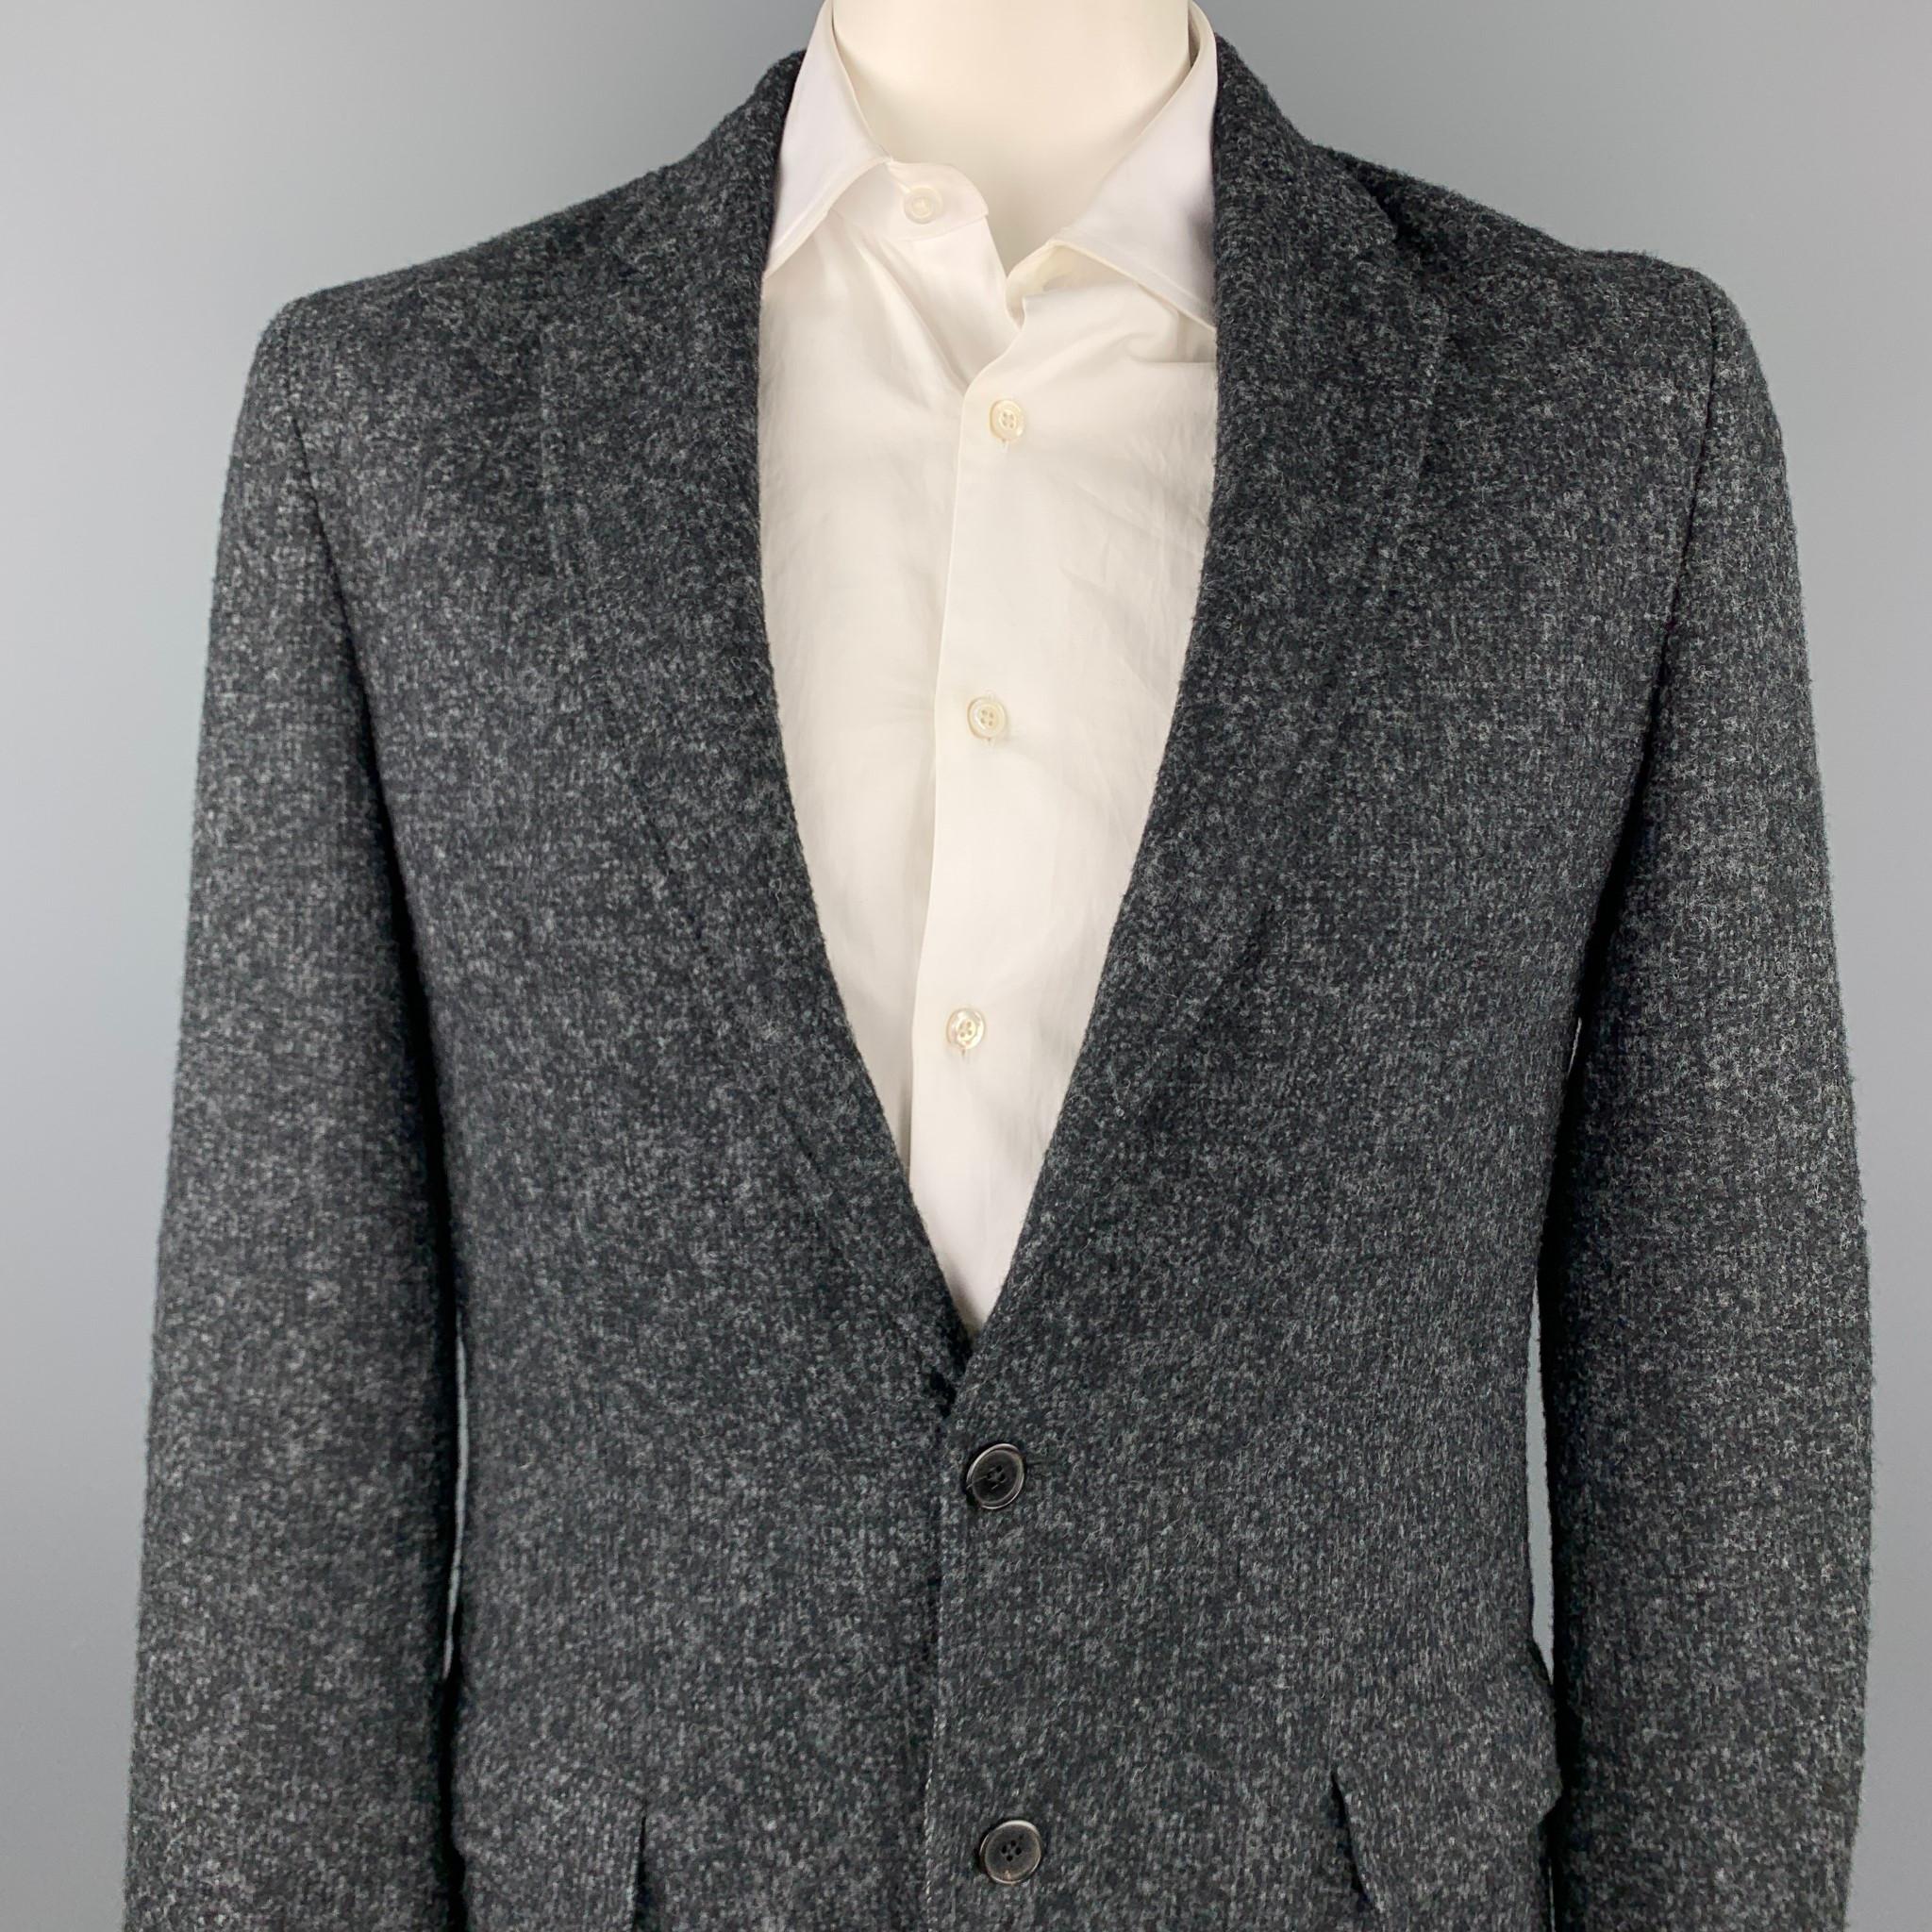 LOUIS VUITTON sport coat comes in a black & grey textured wool / alpaca with a half liner featuring a notch lapel, flap pockets, and a two button closure. Made in Italy.

Excellent Pre-Owned Condition.
Marked: IT 54
Original Retail Price: